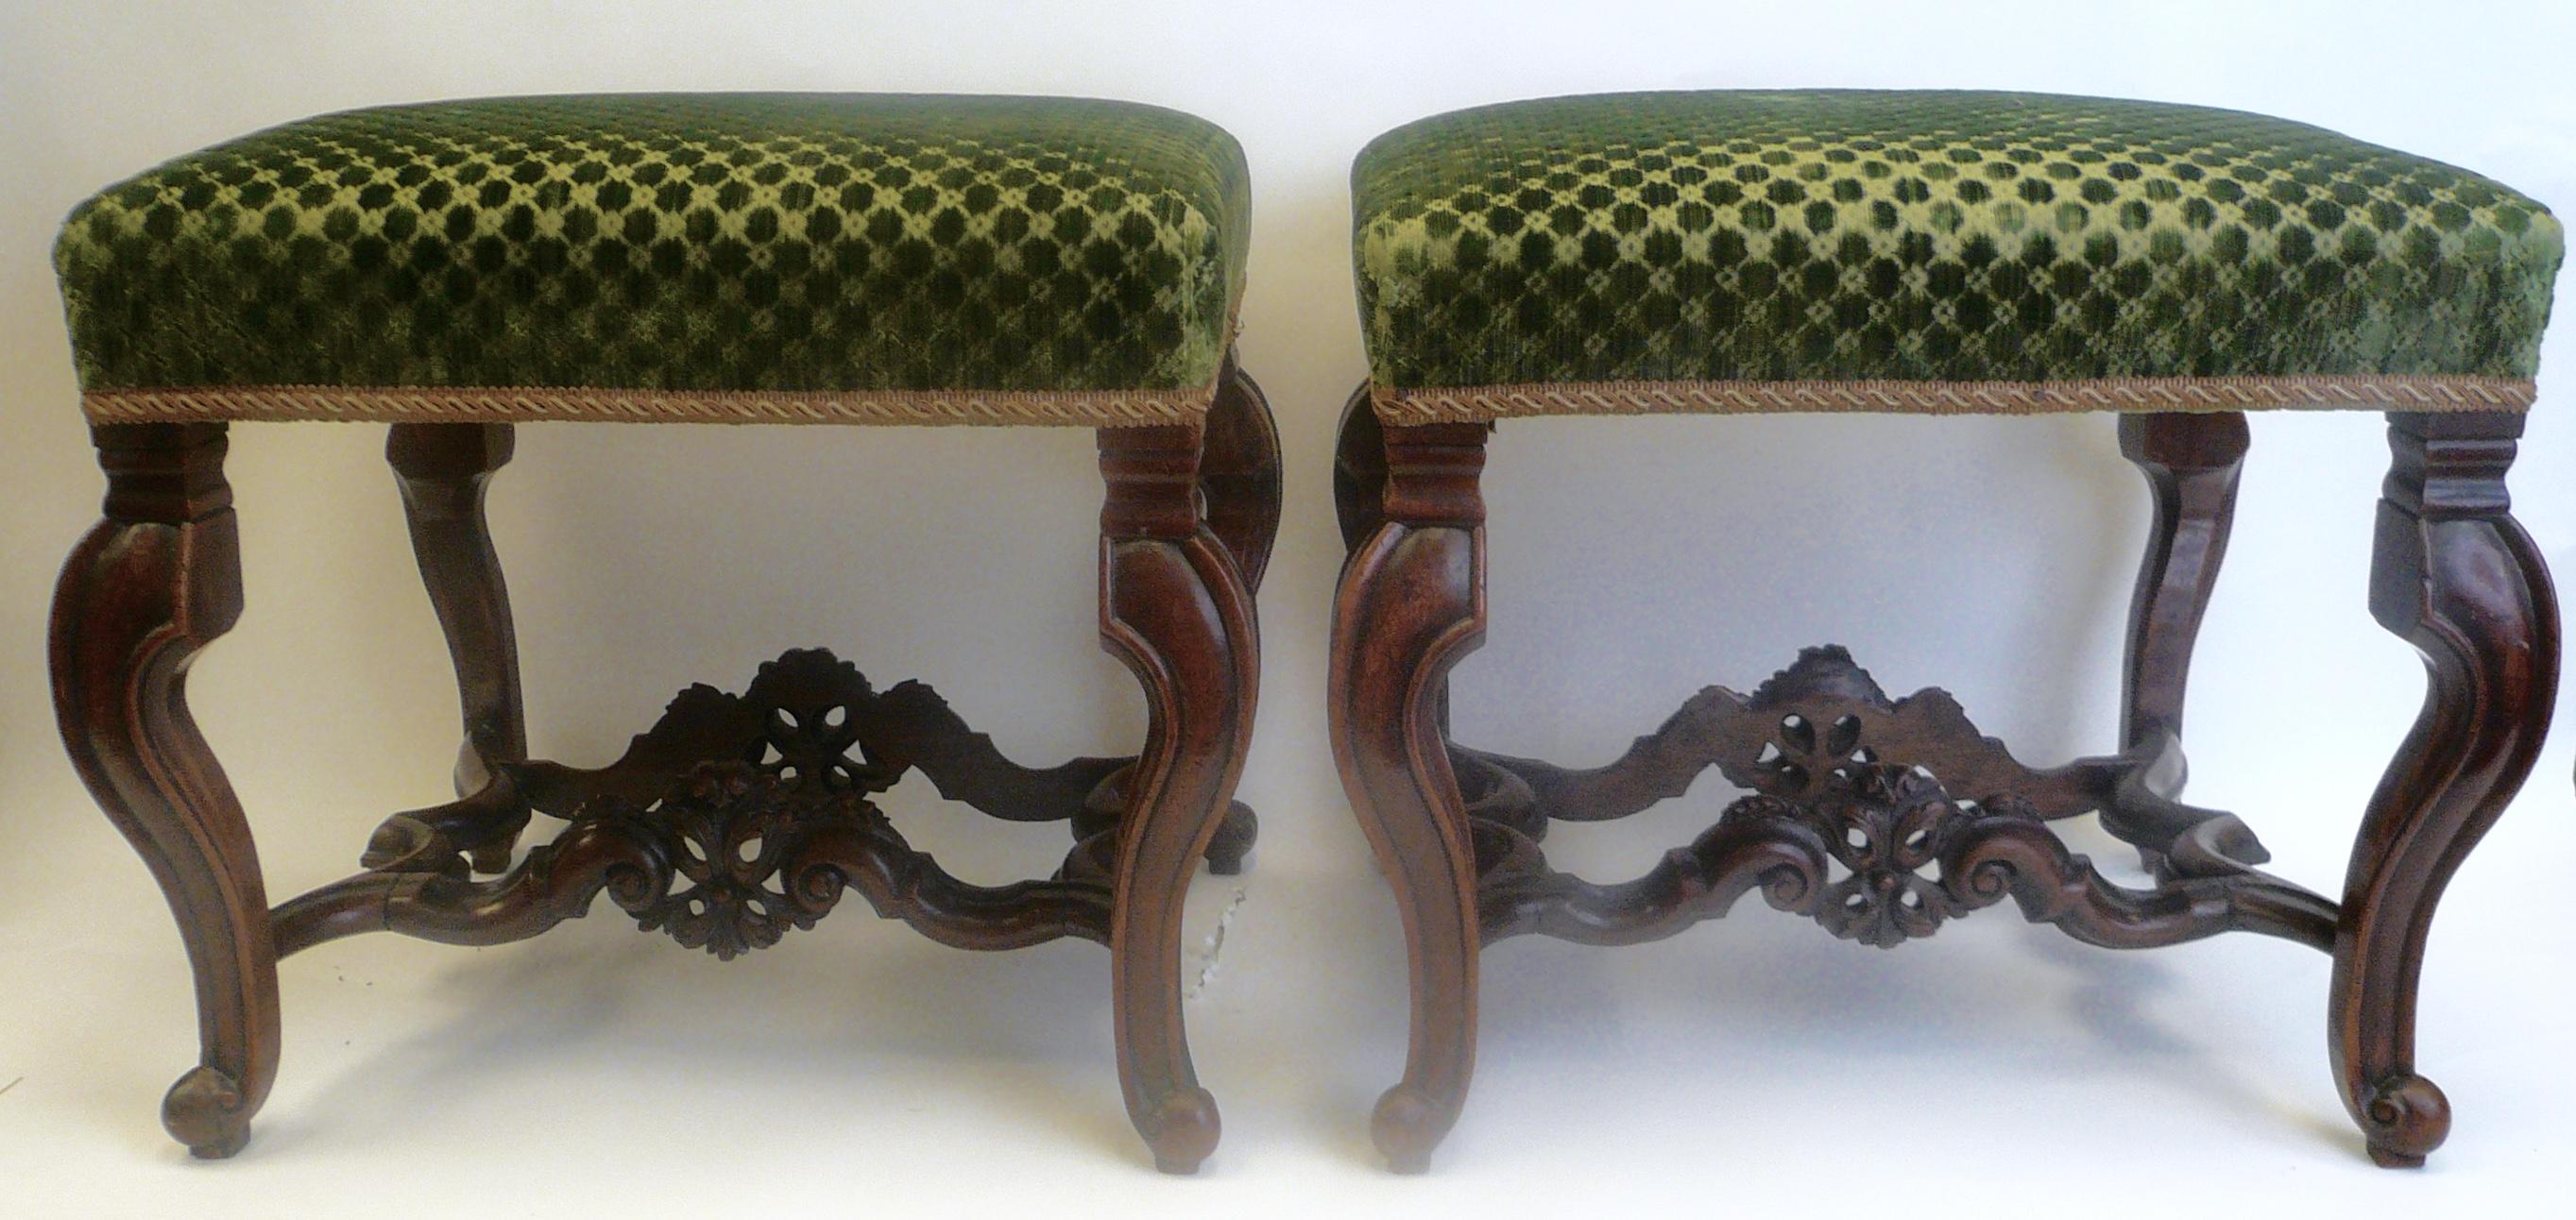 17th Century Pair of English Baroque Carved Walnut, William and Mary Upholstered Benches